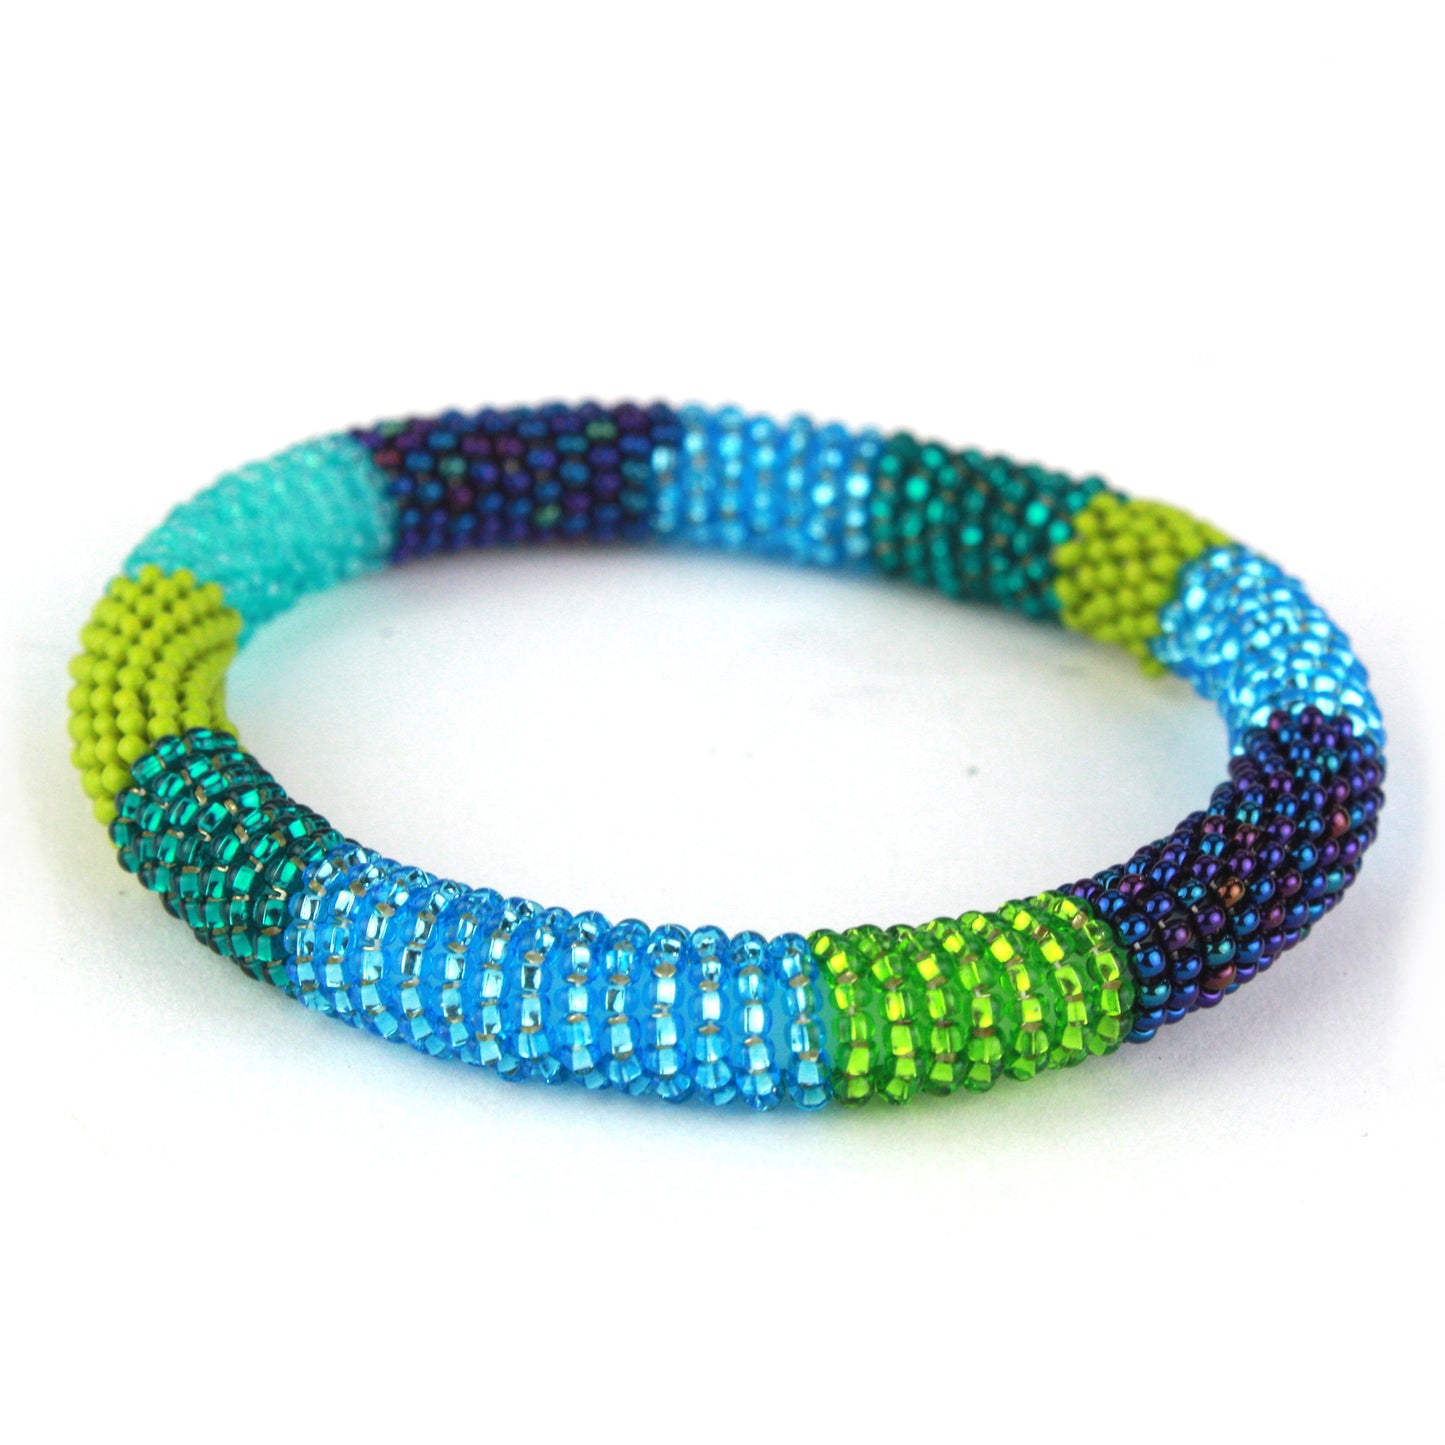 Beaded bracelet - Blues and greens